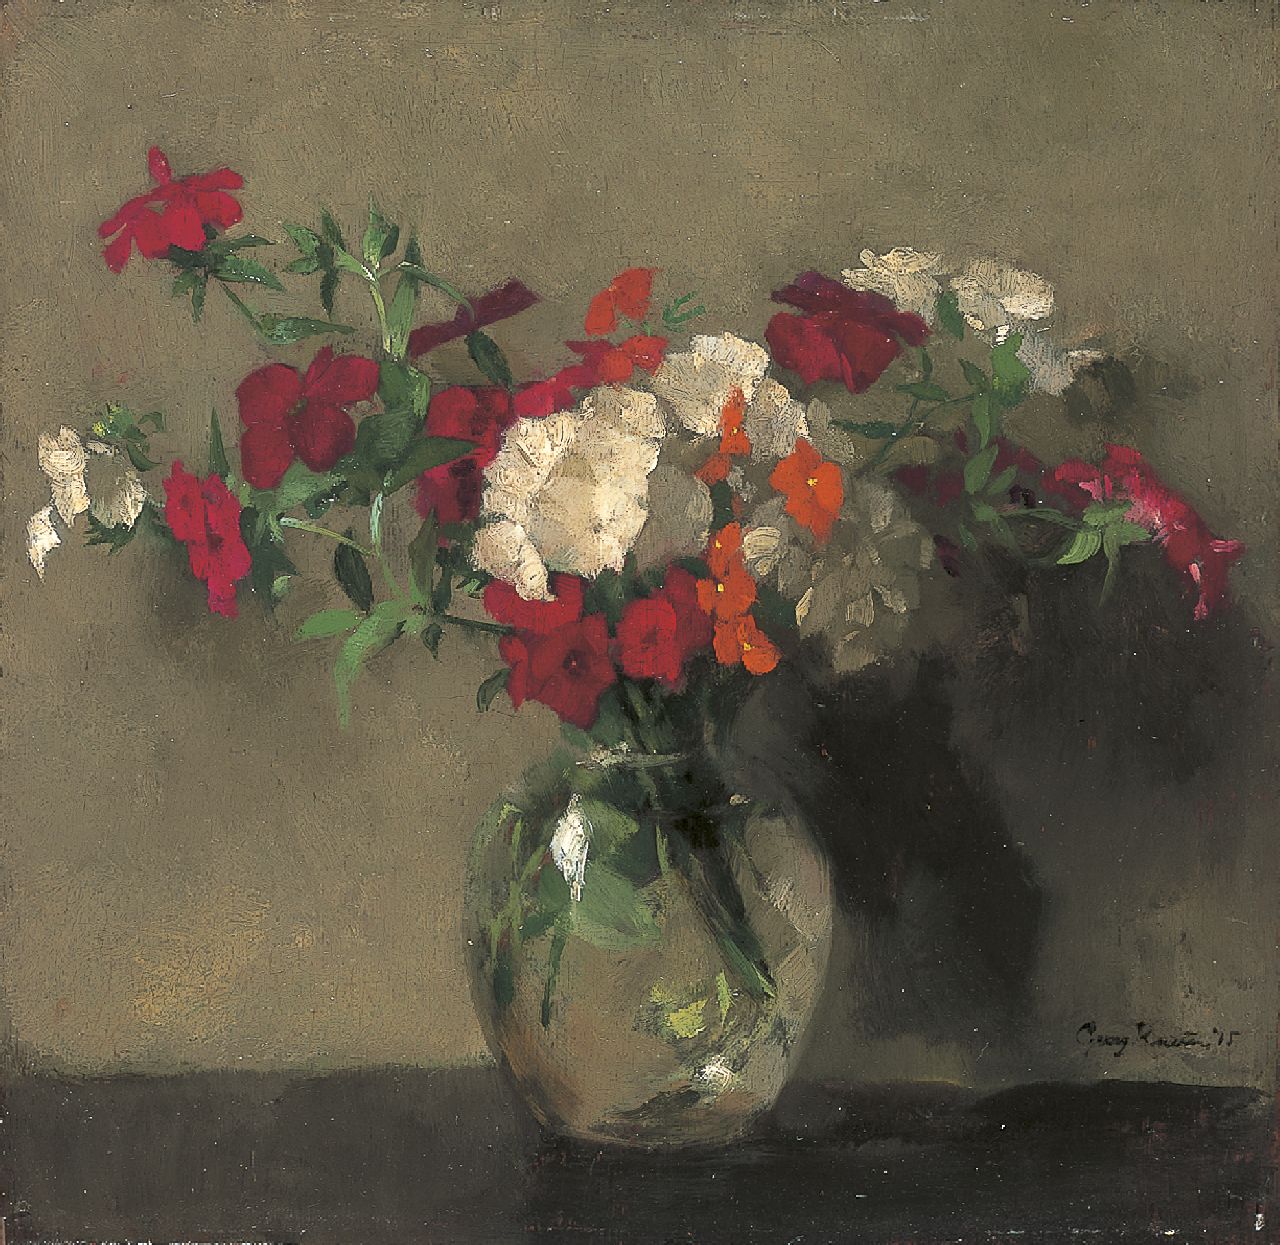 Rueter W.C.G.  | Wilhelm Christian 'Georg' Rueter, A flower still life, oil on panel 26.5 x 27.5 cm, signed l.r. and dated '15